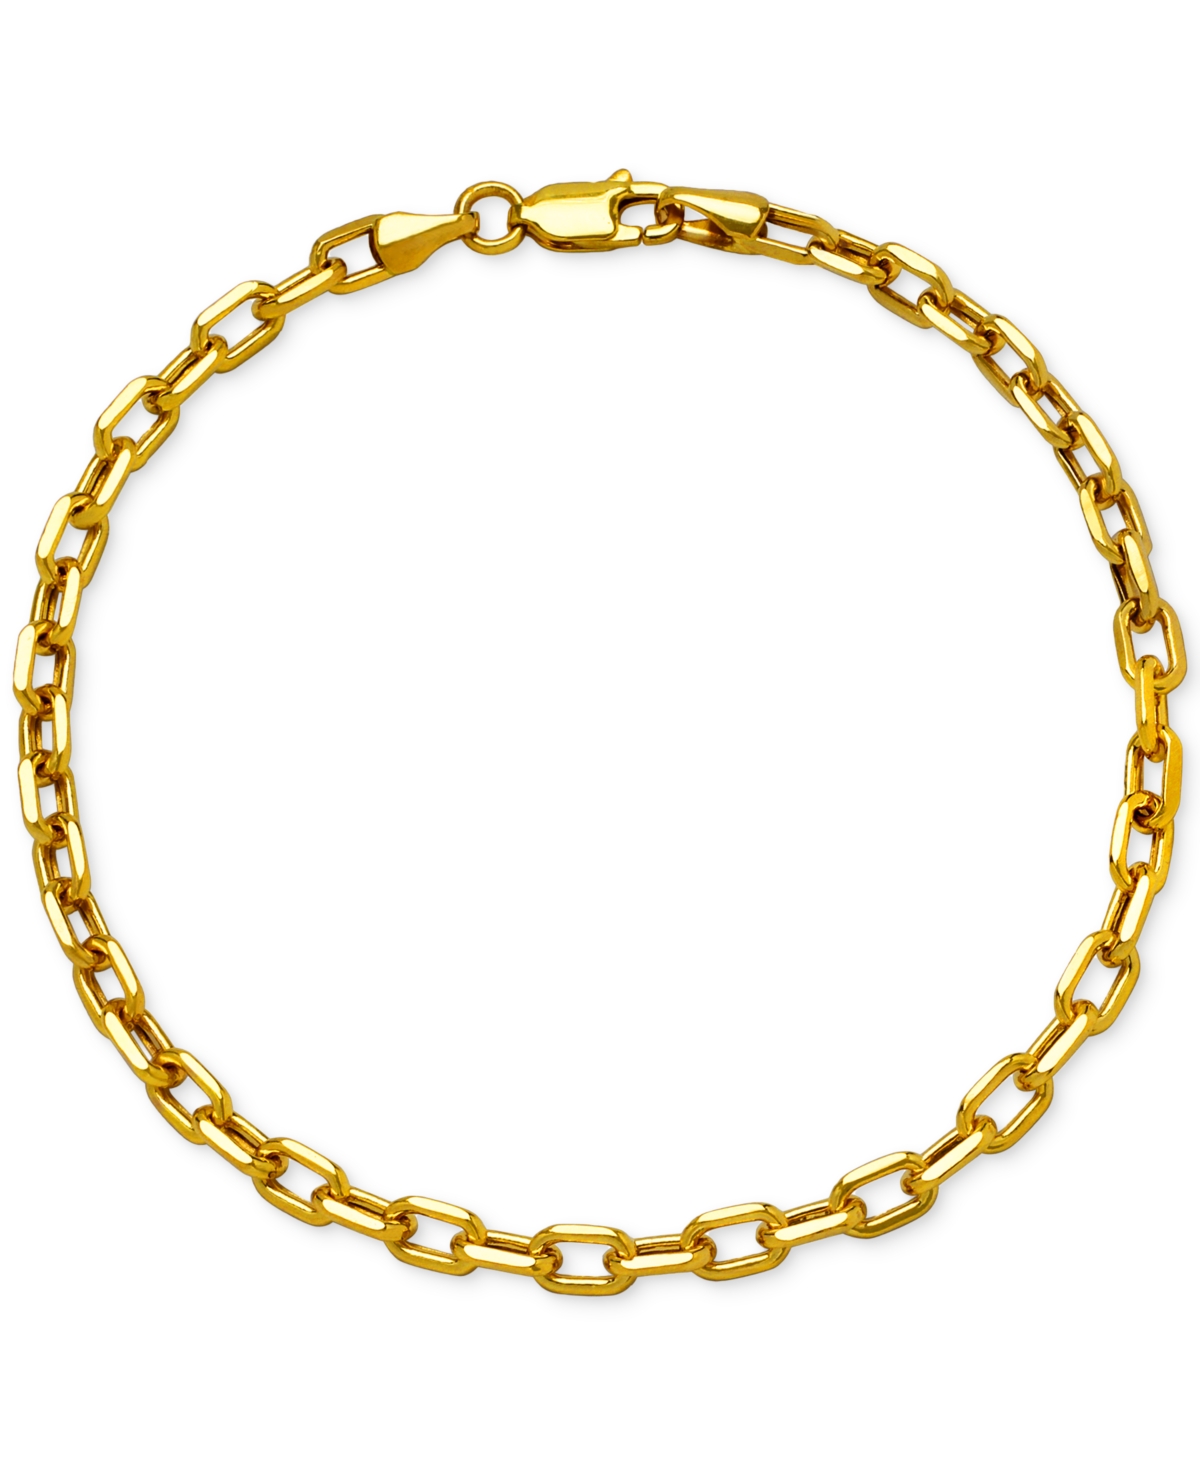 Paperclip Link Chain Bracelet in 14k Gold 7-1/2" - Yellow Gold